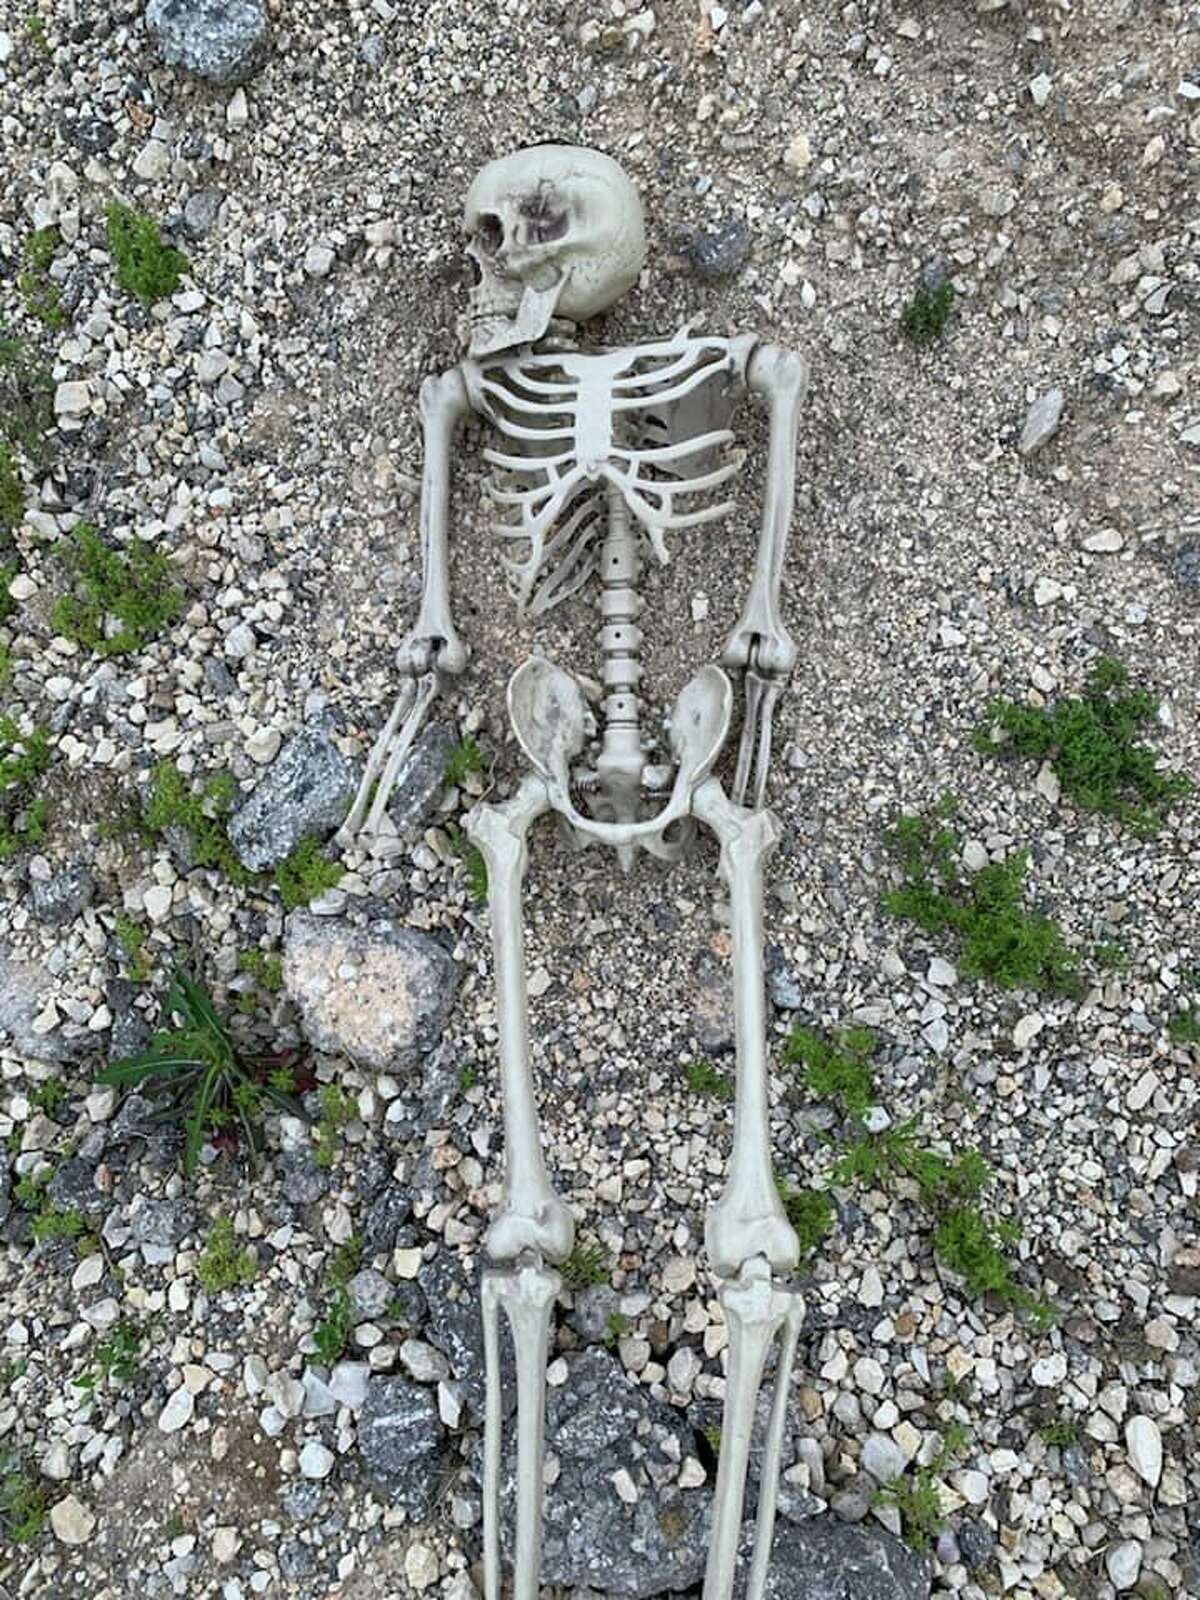 Converse police were called after a bystander reported finding possible human remains that turned out to be a plastic skeleton prop.